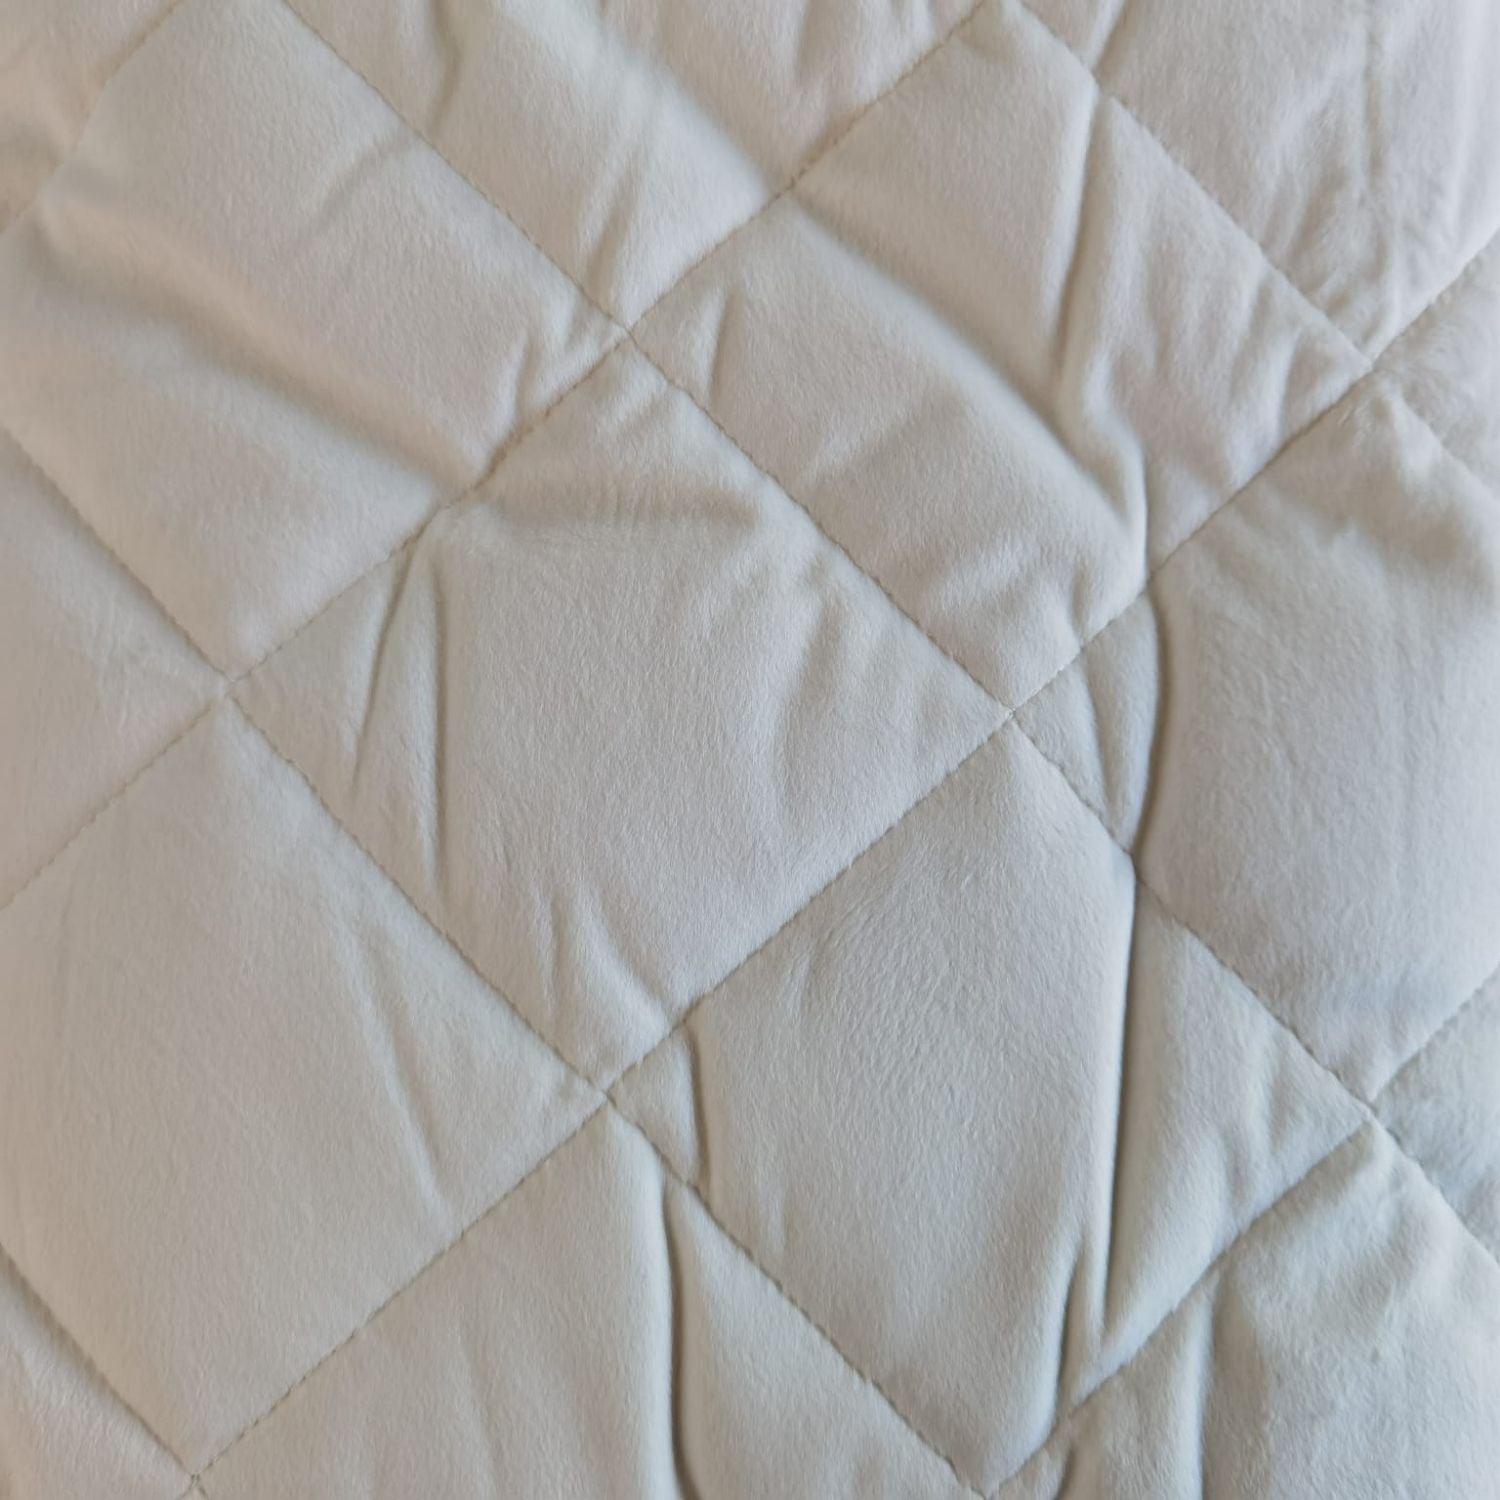 The Home Bedroom Fleece Mattress Protector - White - Single Size 3 Shaws Department Stores